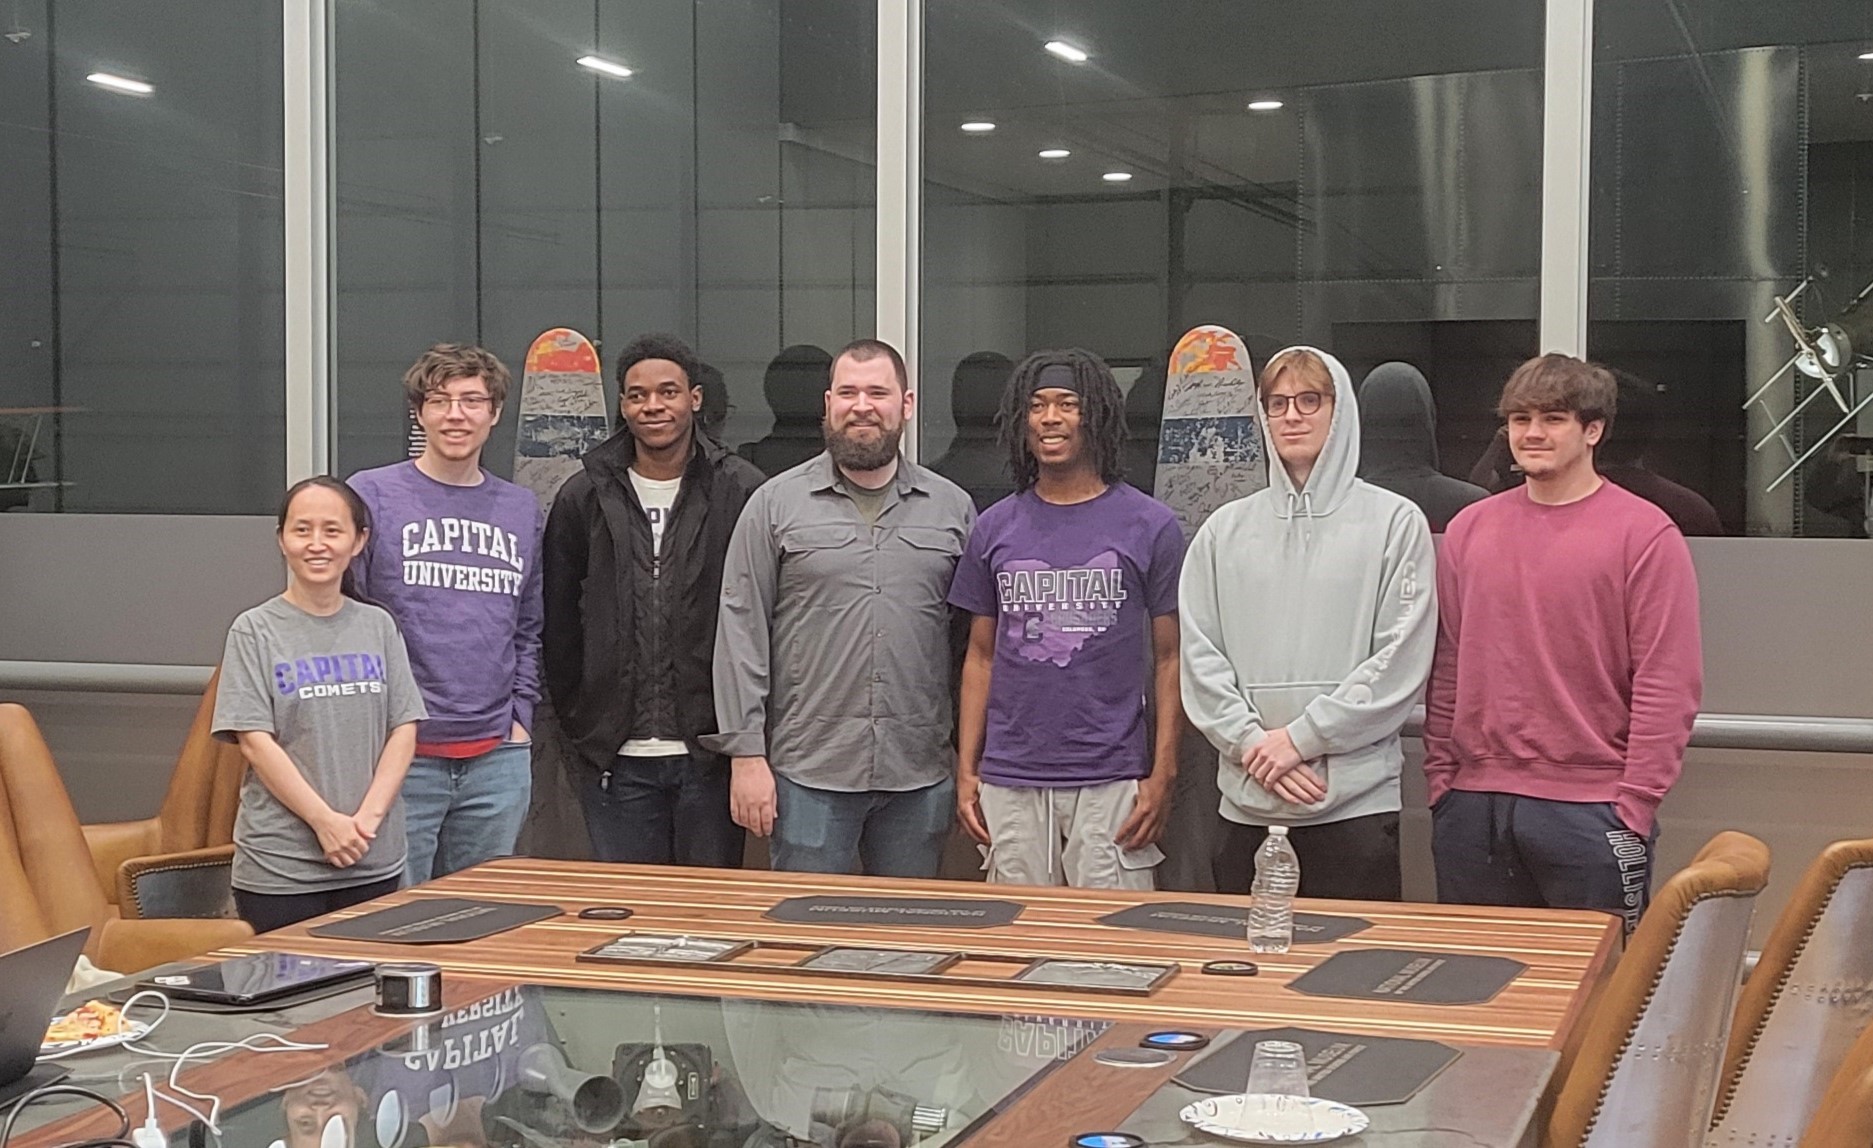 A group of students from Capital University pose in the museum's Centennial Boardroom.